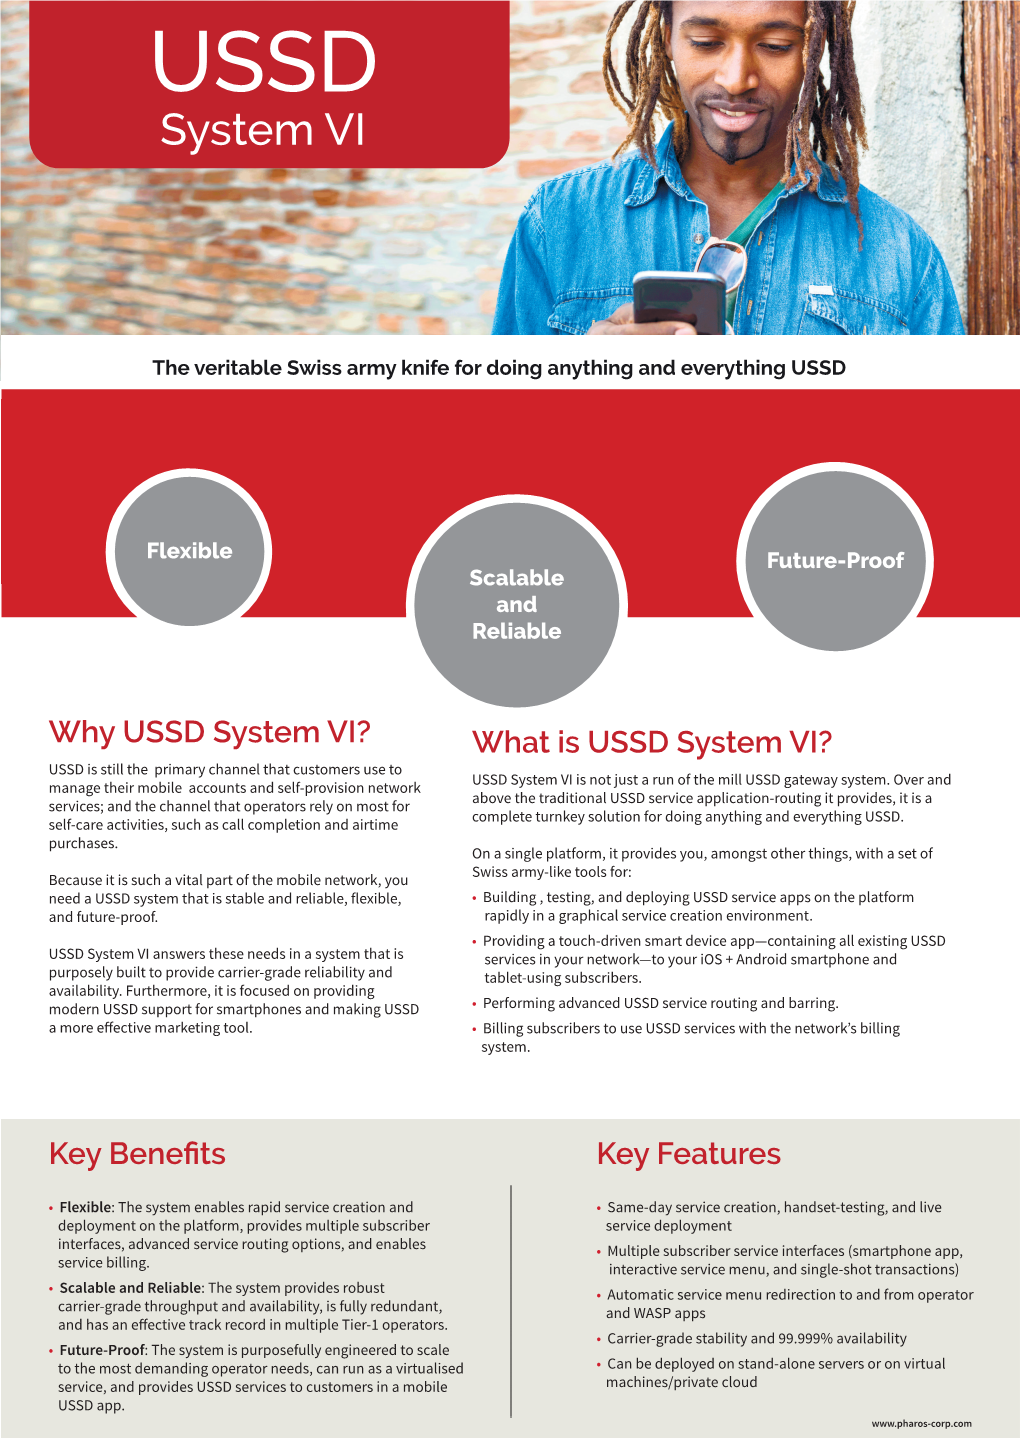 USSD System VI Product Brochure